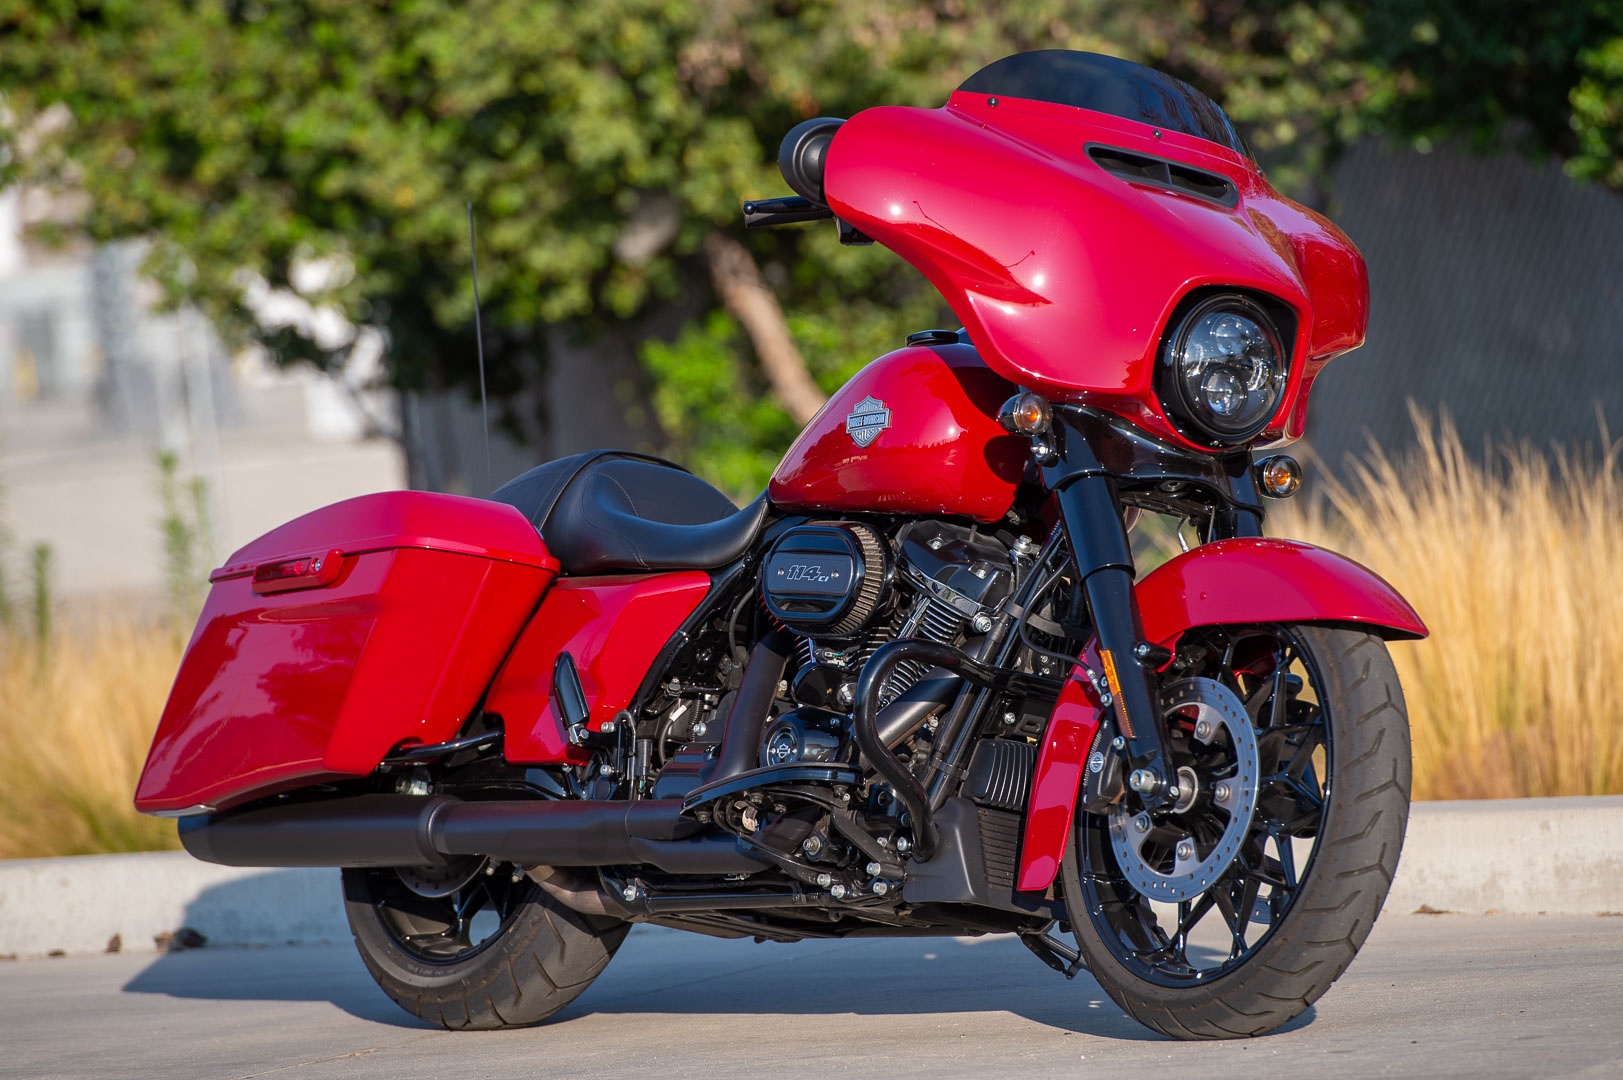 2021 Harley-Davidson Street Glide Special Review: Price